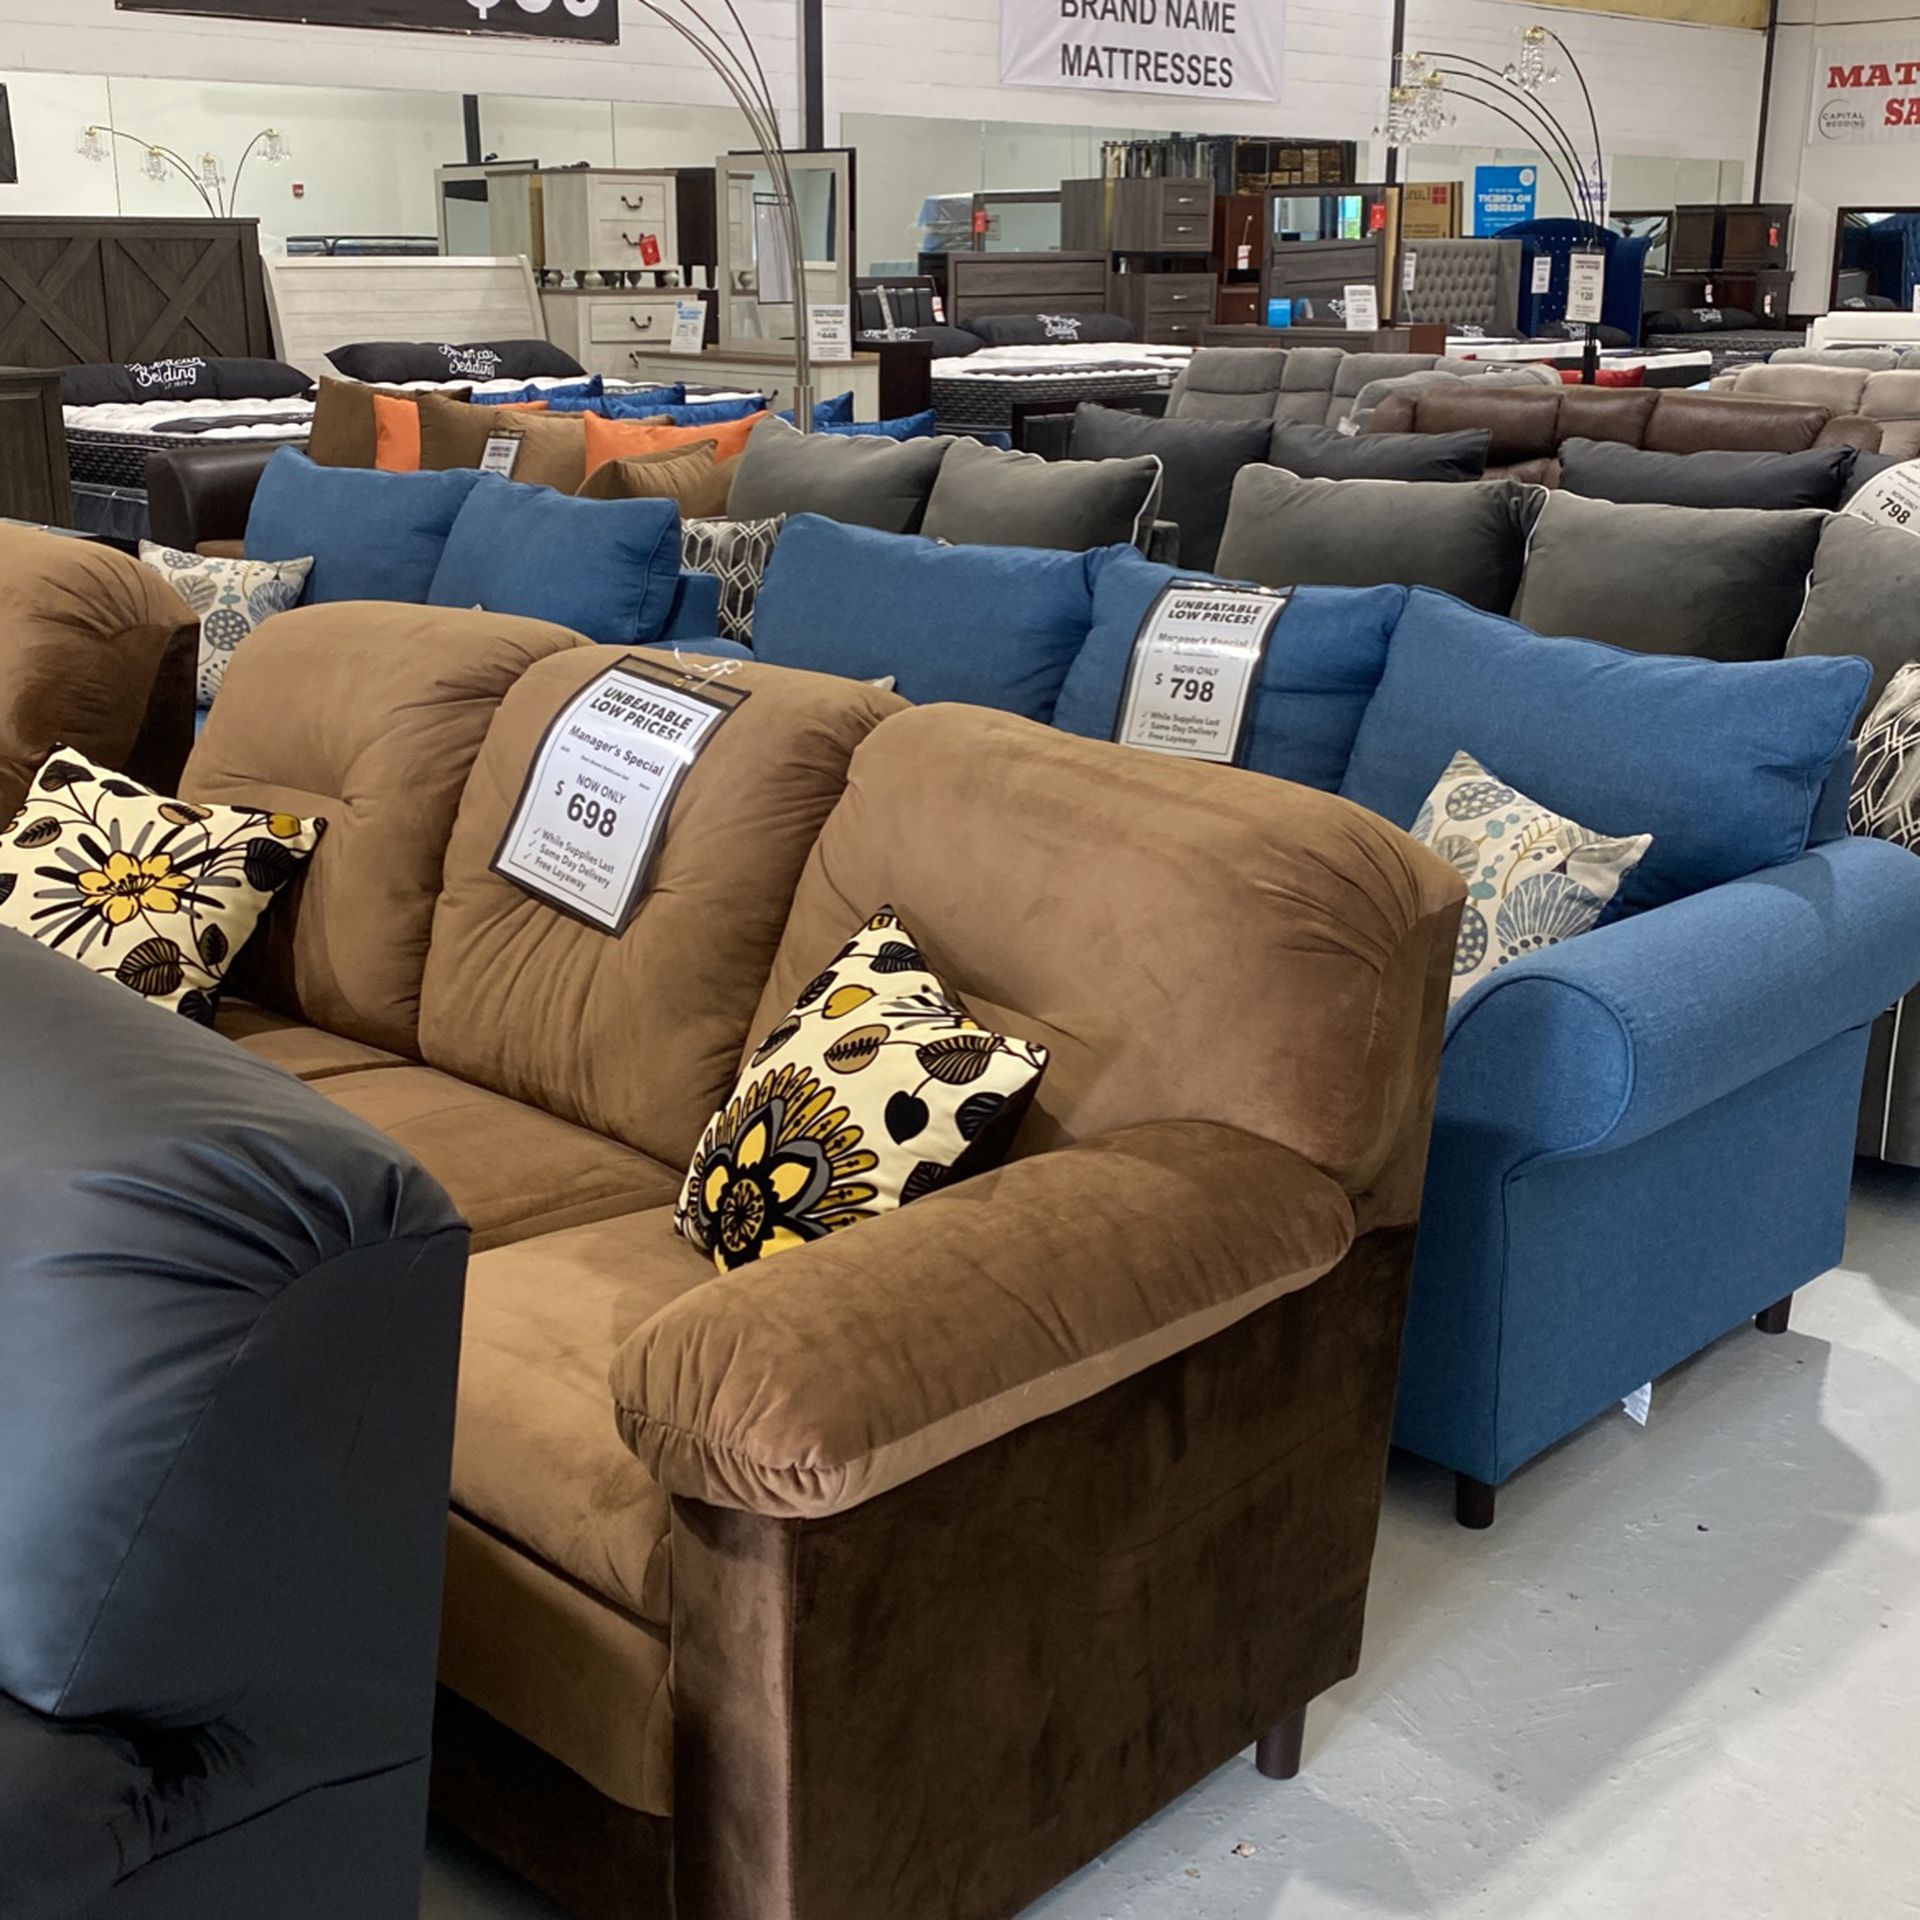 Sofa Sets Starting At Only $598!